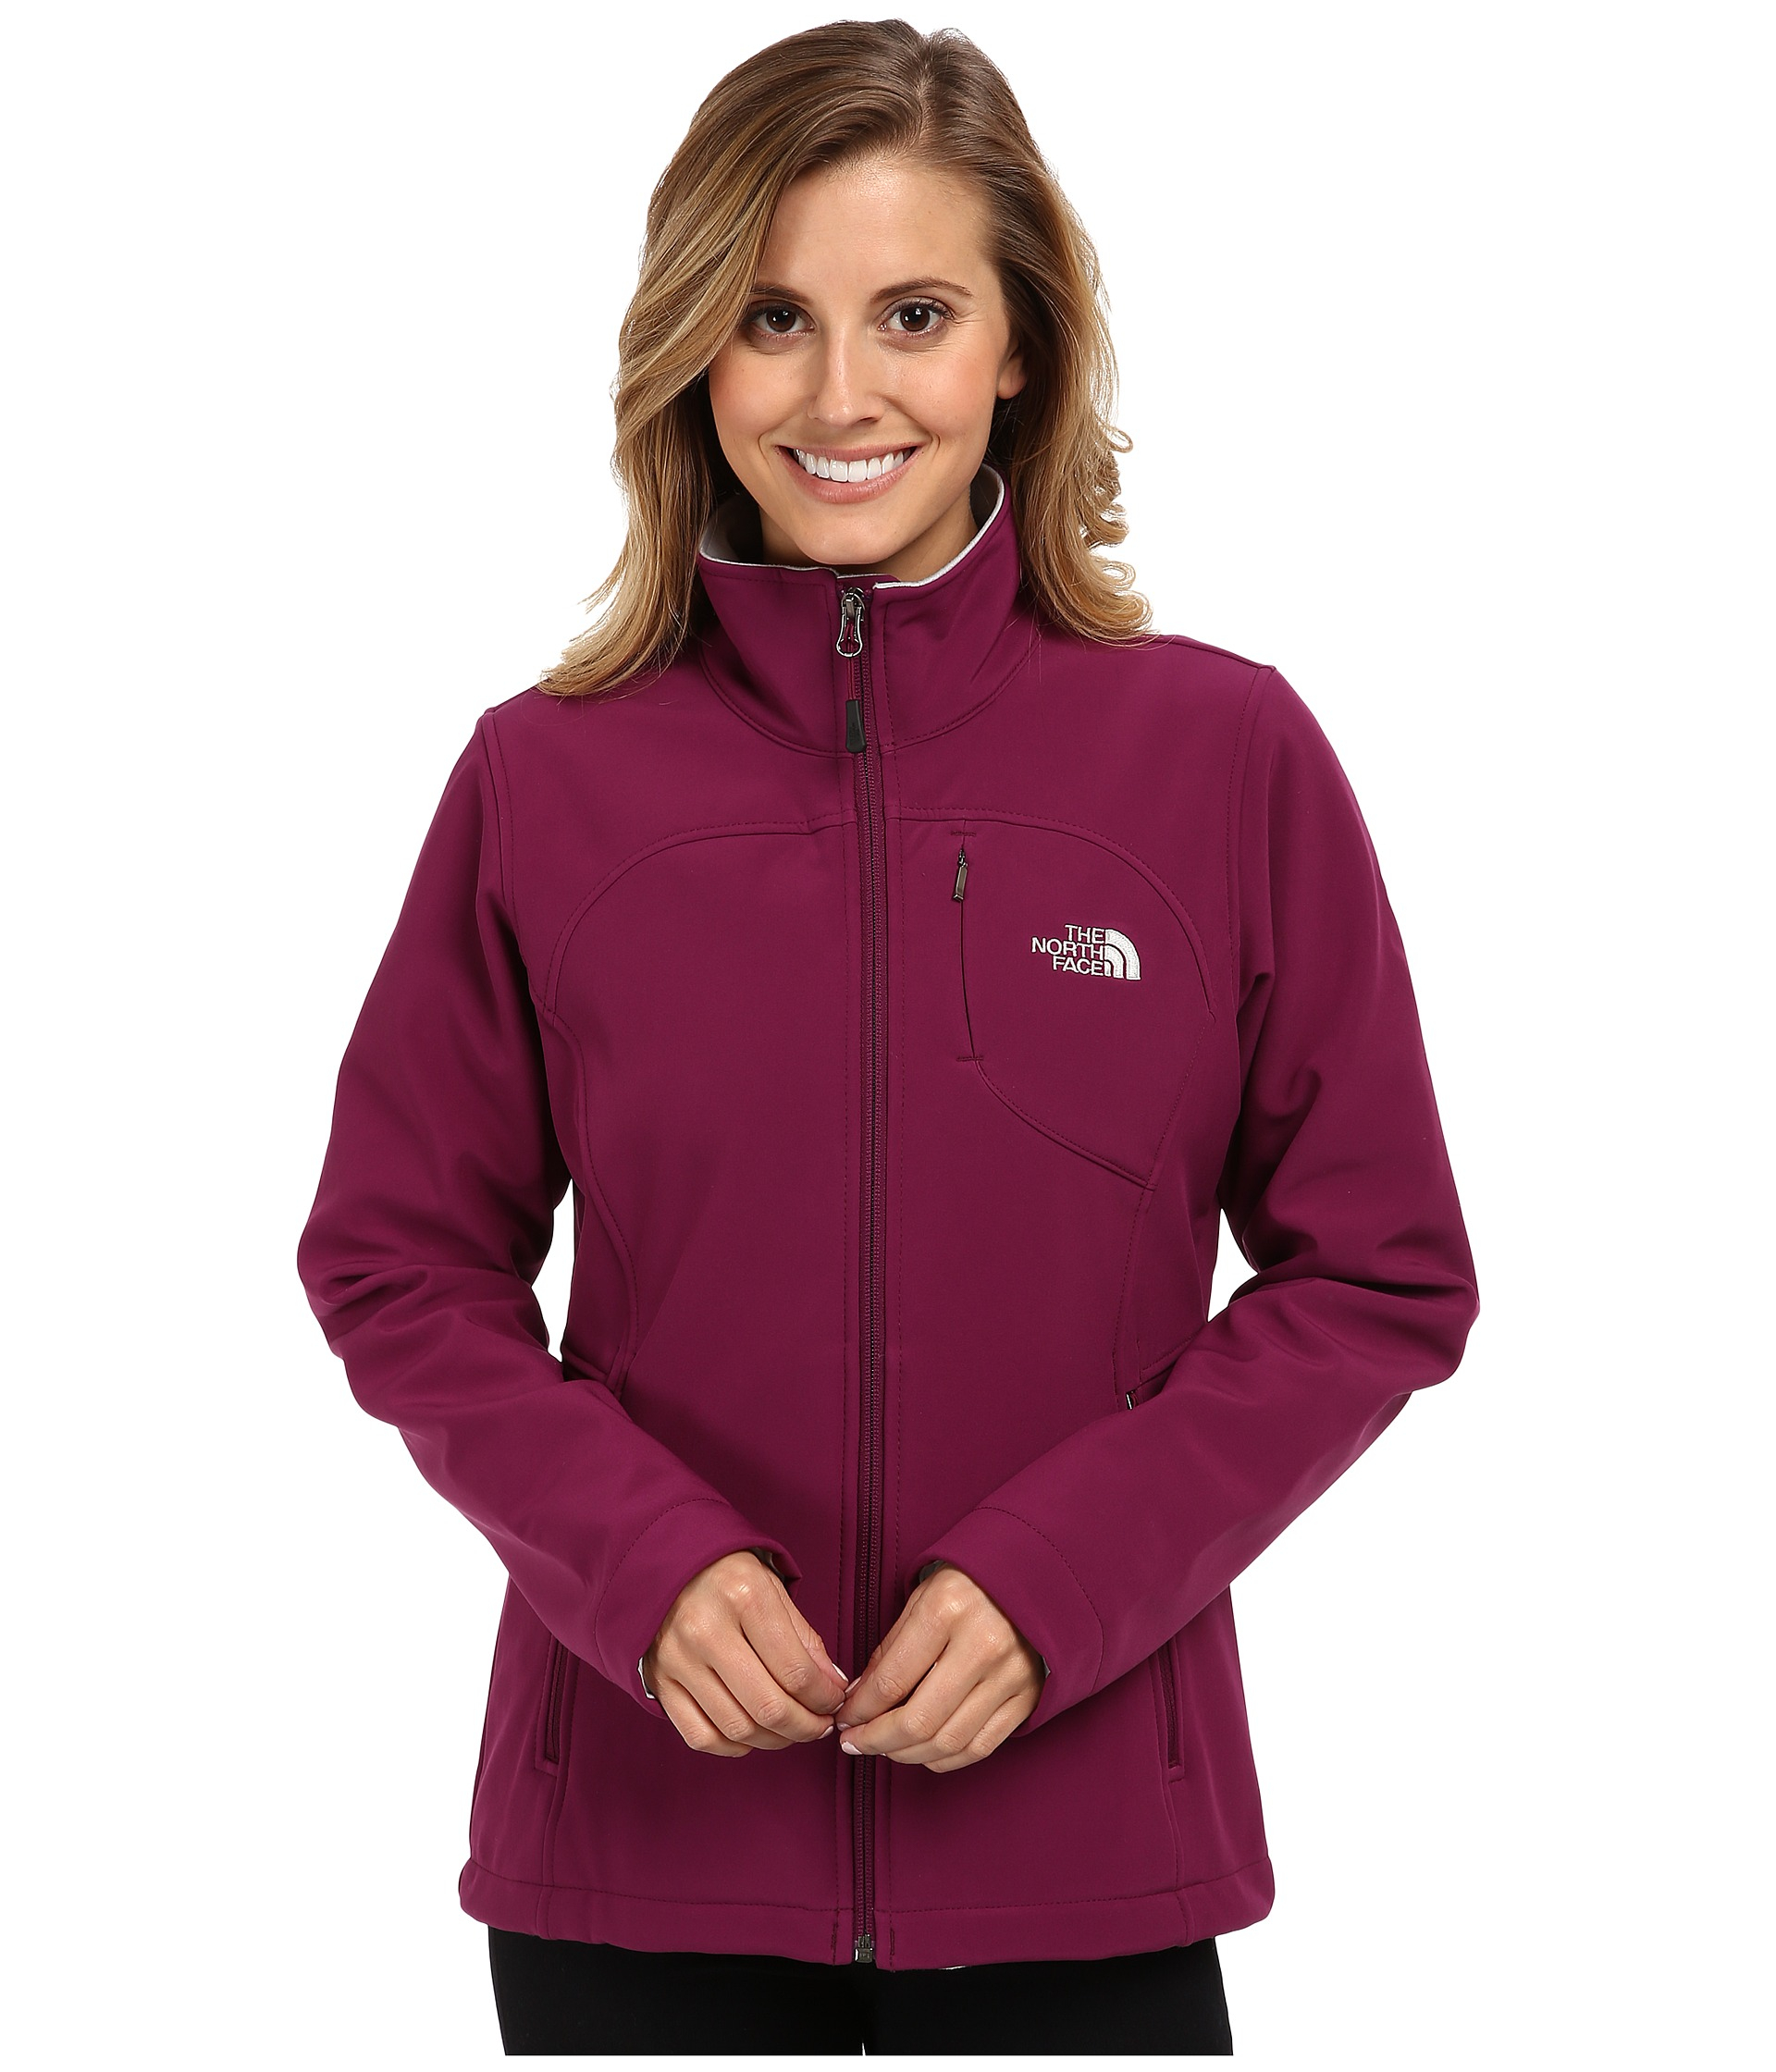 Lyst - The North Face Apex Bionic Jacket in Purple